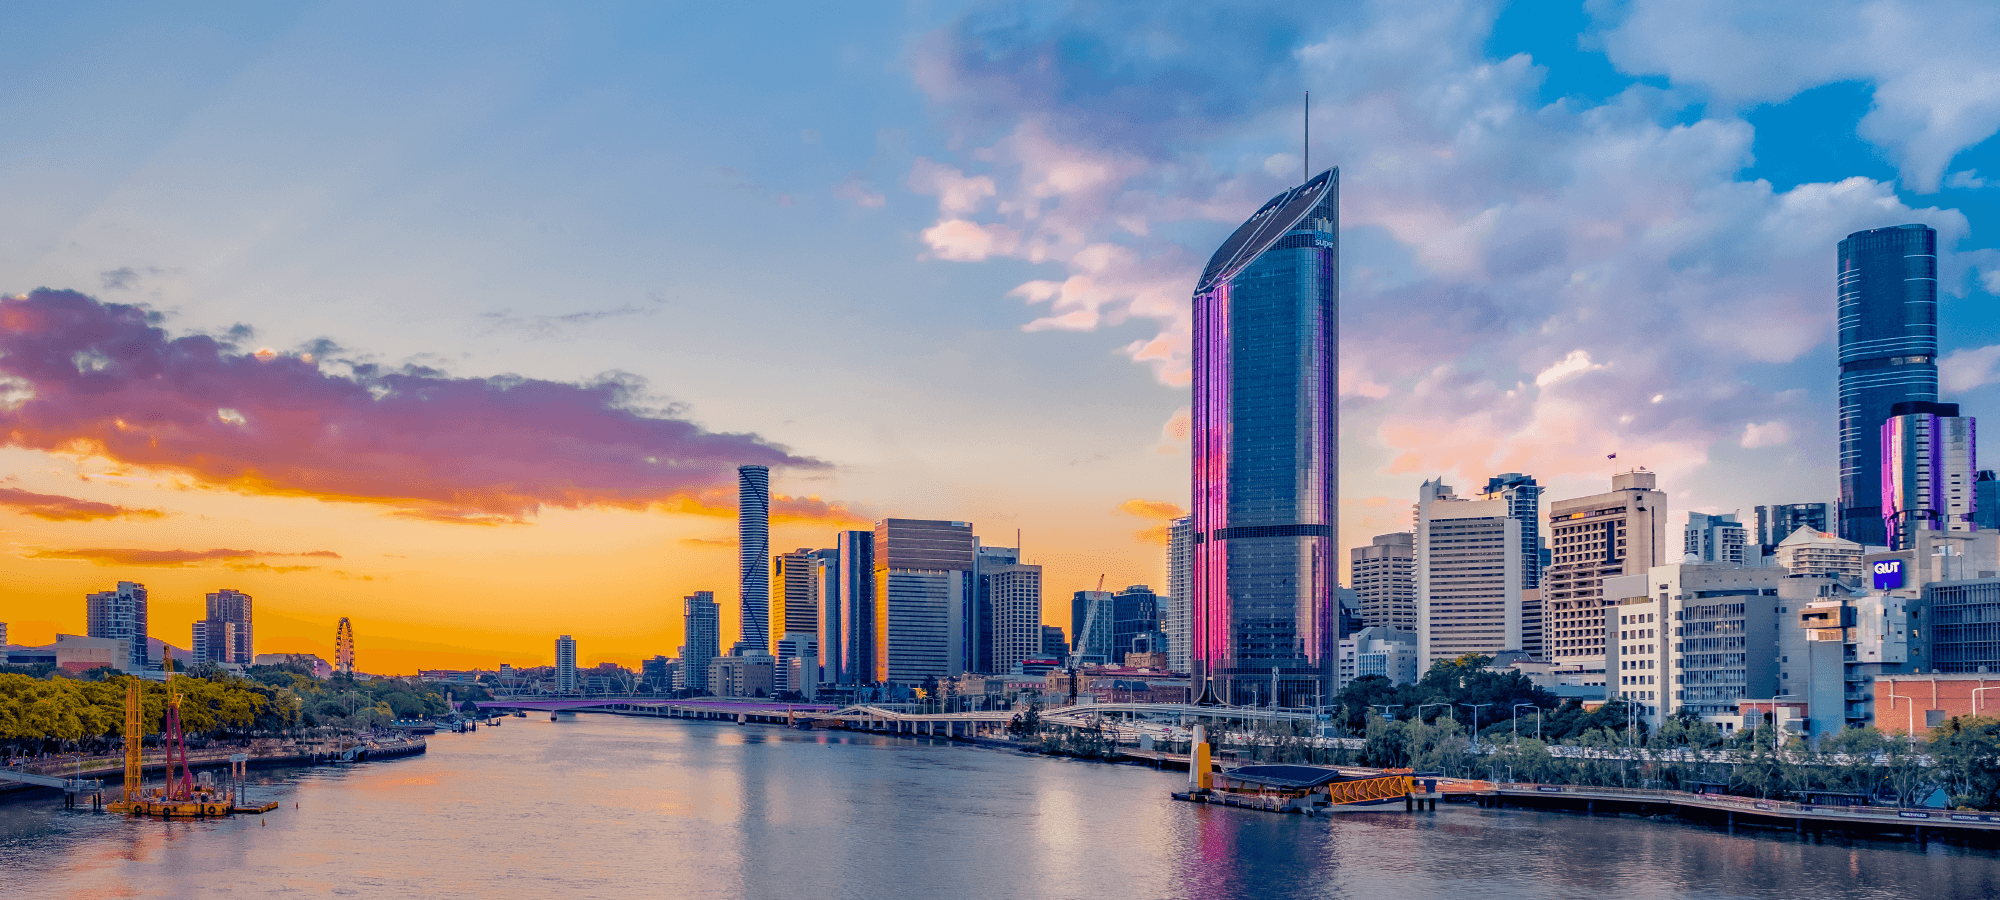 A view of Brisbane at sunset